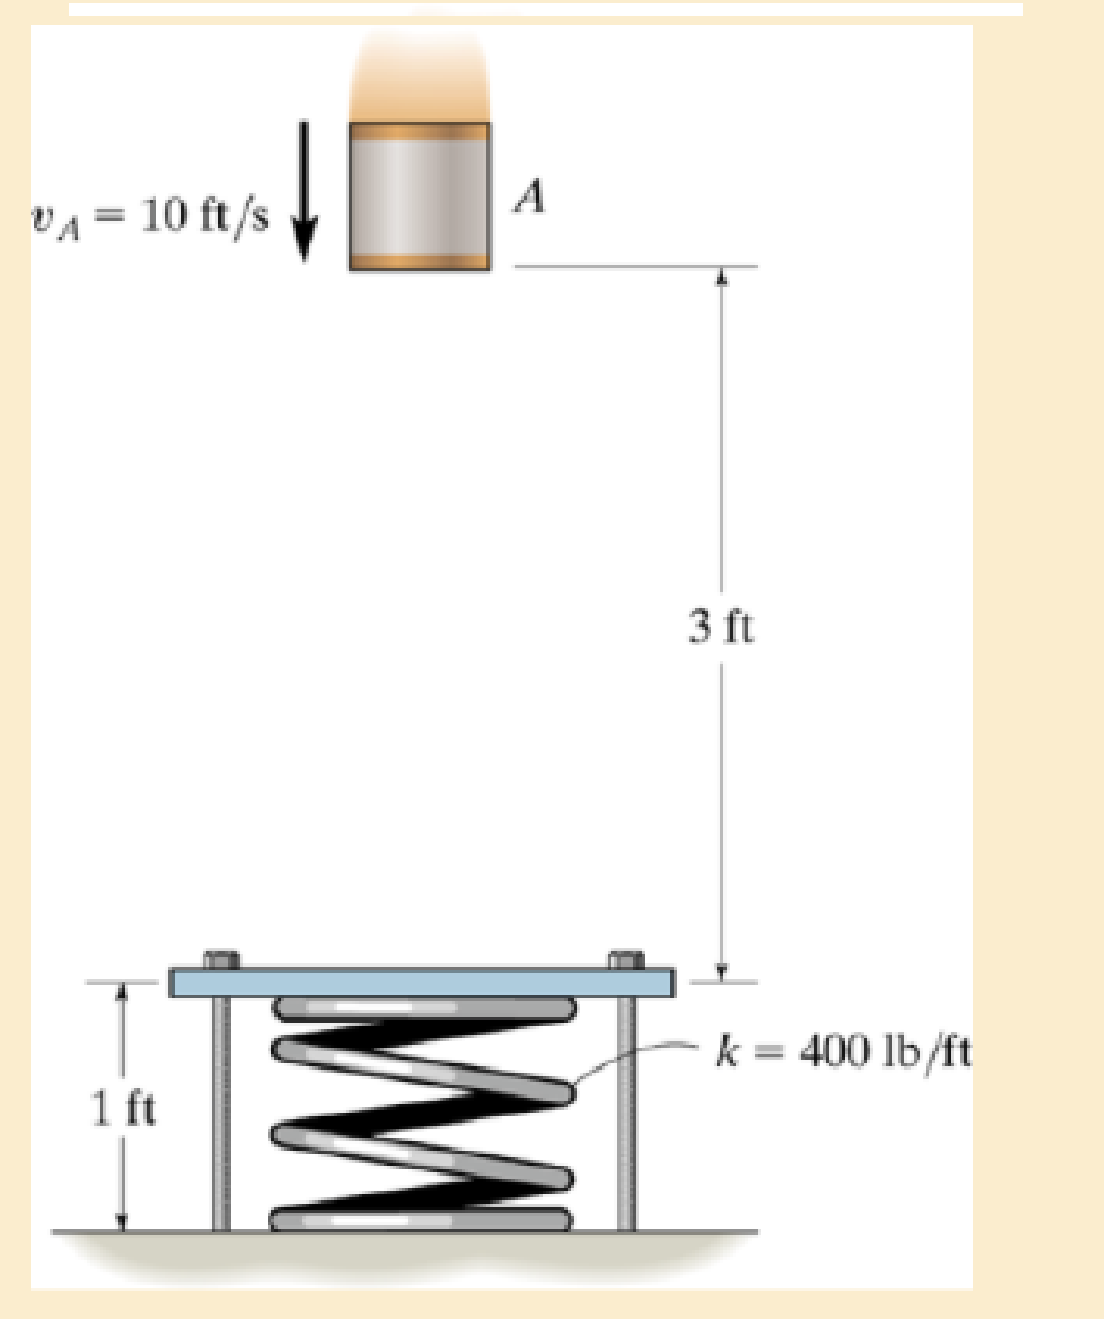 Chapter 14.3, Problem 25P, The 5-lb cylinder is falling from A with a speed vA = 10 ft/s onto the platform. Determine the 